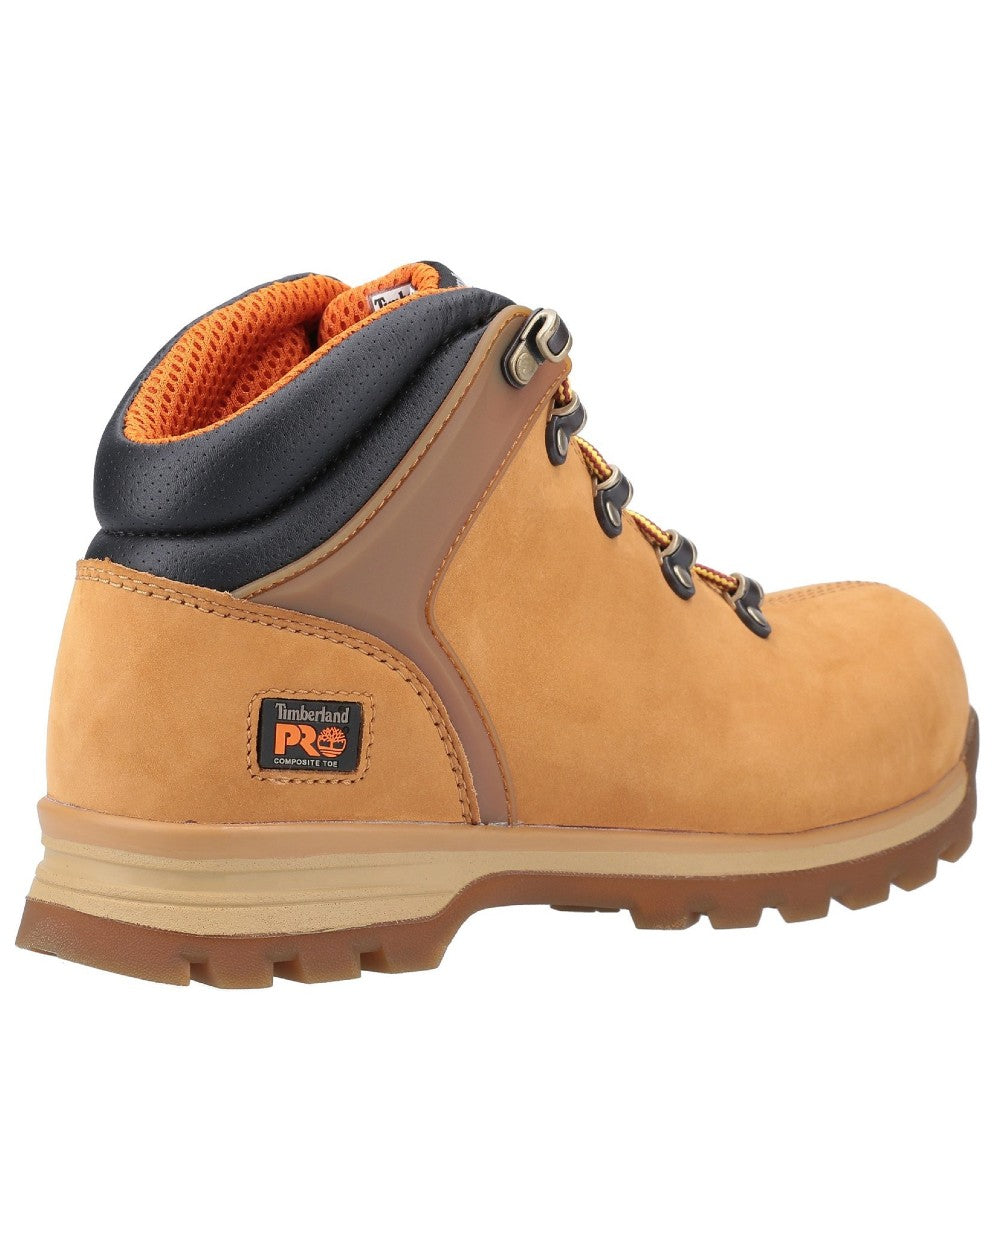 Wheat coloured Timberland Pro Splitrock XT Composite Safety Toe Work Boots on white background 